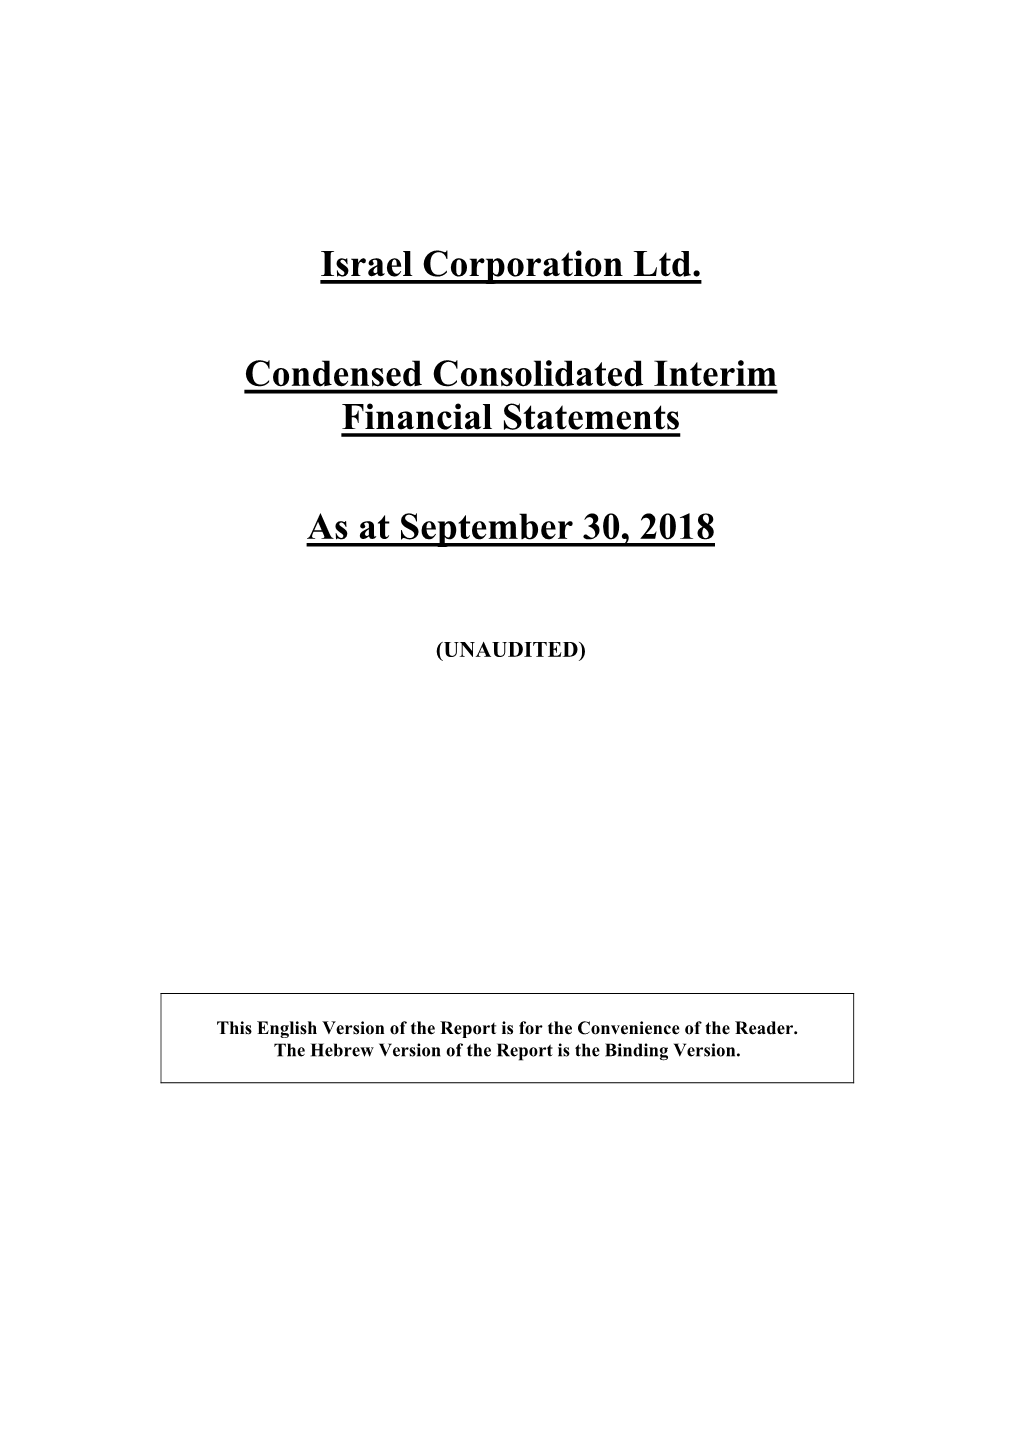 Israel Corporation Ltd. Condensed Consolidated Interim Financial Statements at September 30, 2018 Unaudited